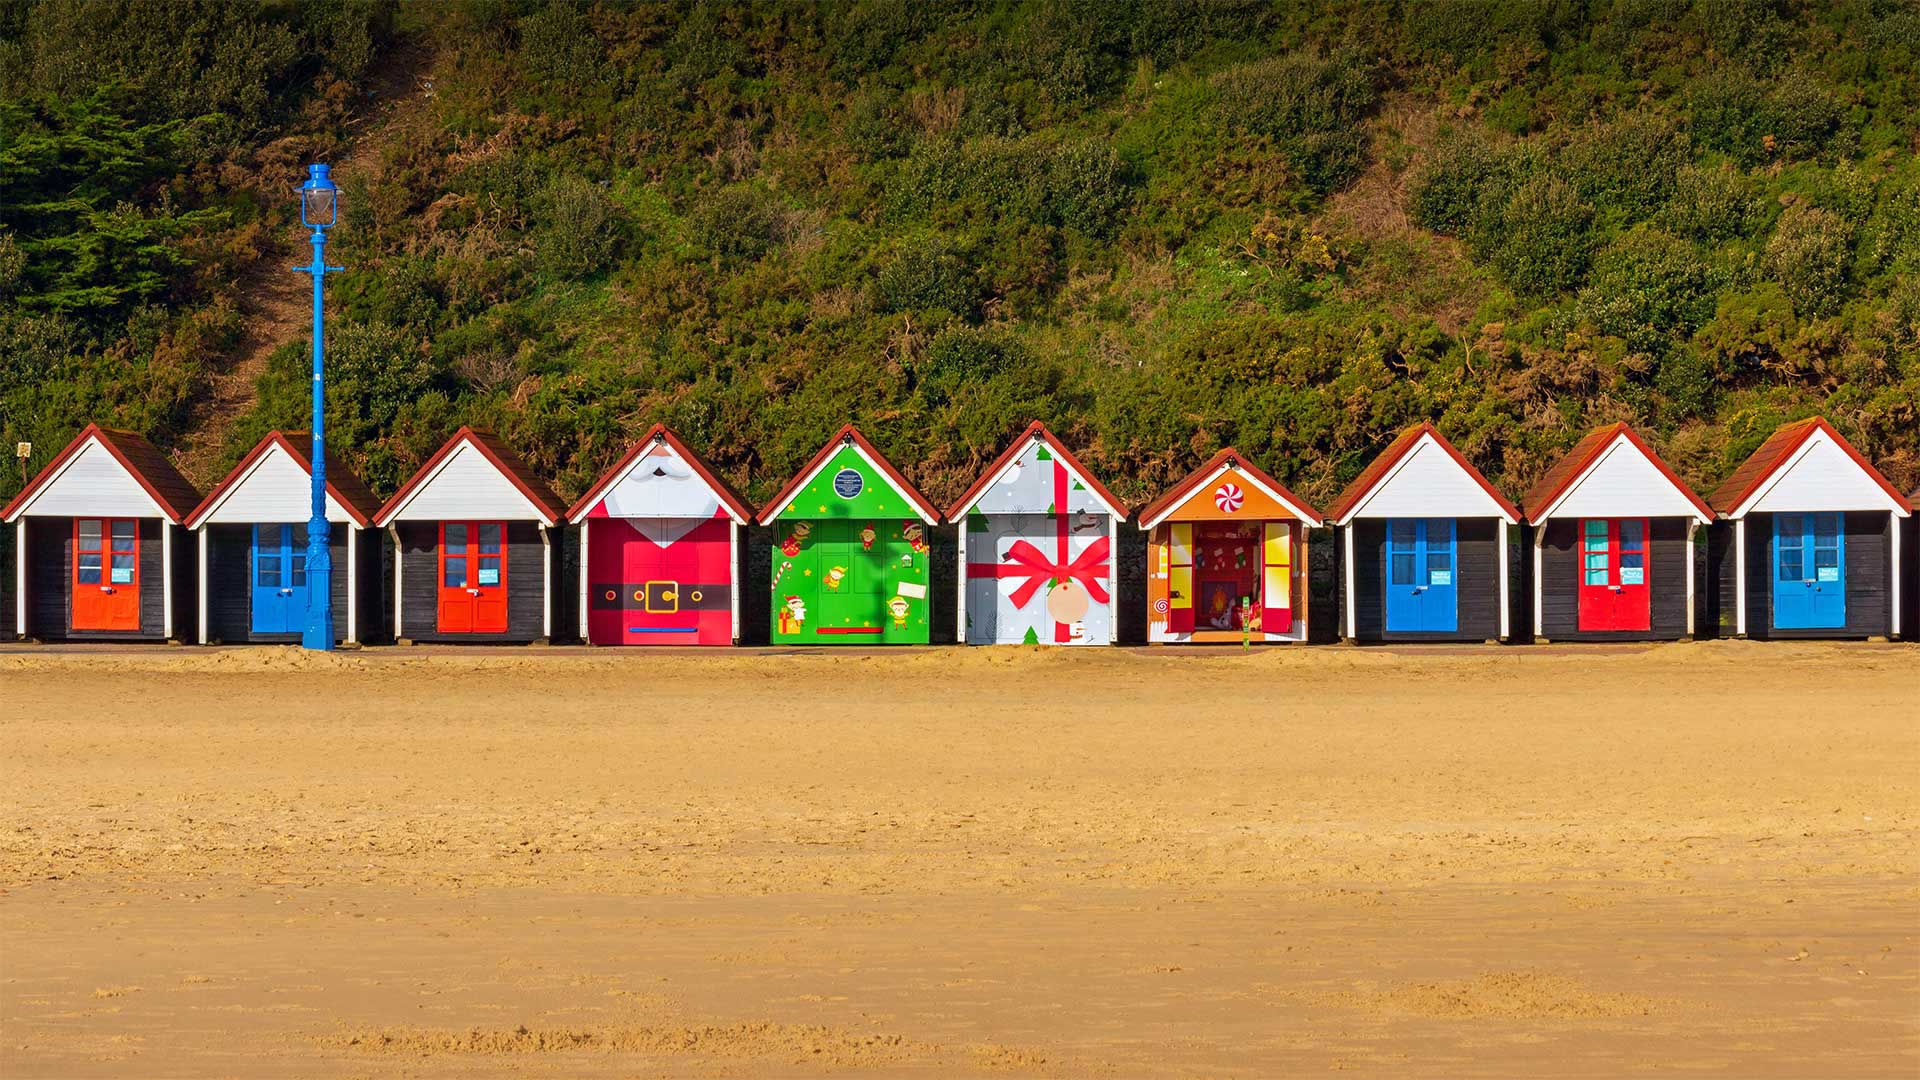 Christmas-themed beach huts in Bournemouth, England - Allouphoto/Alamy)